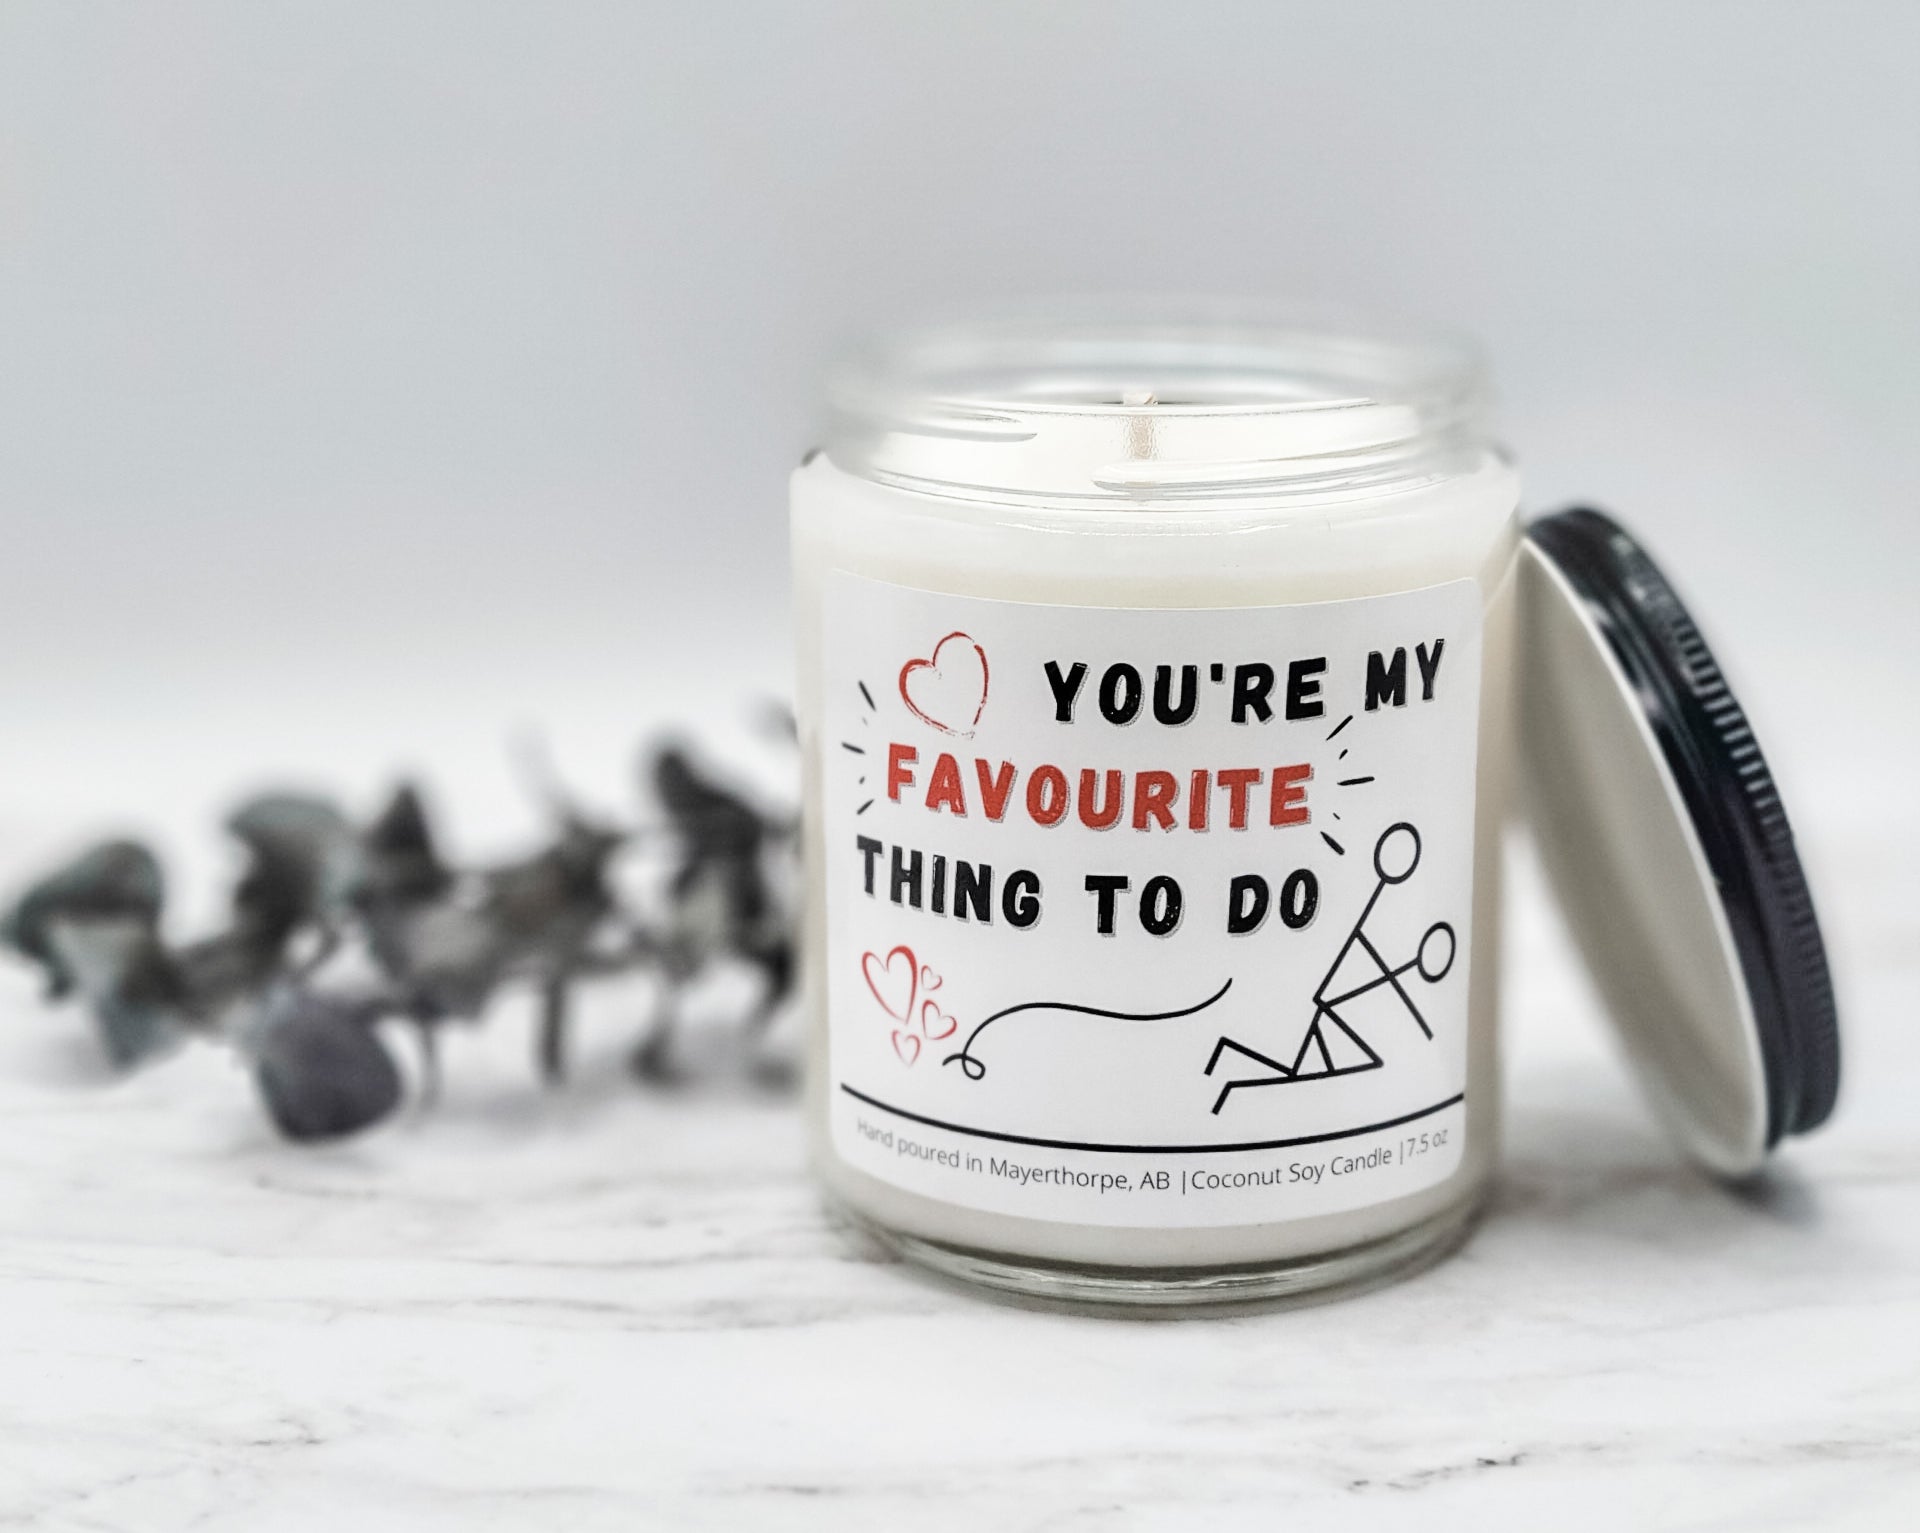 You're my favorite thing to do, candle